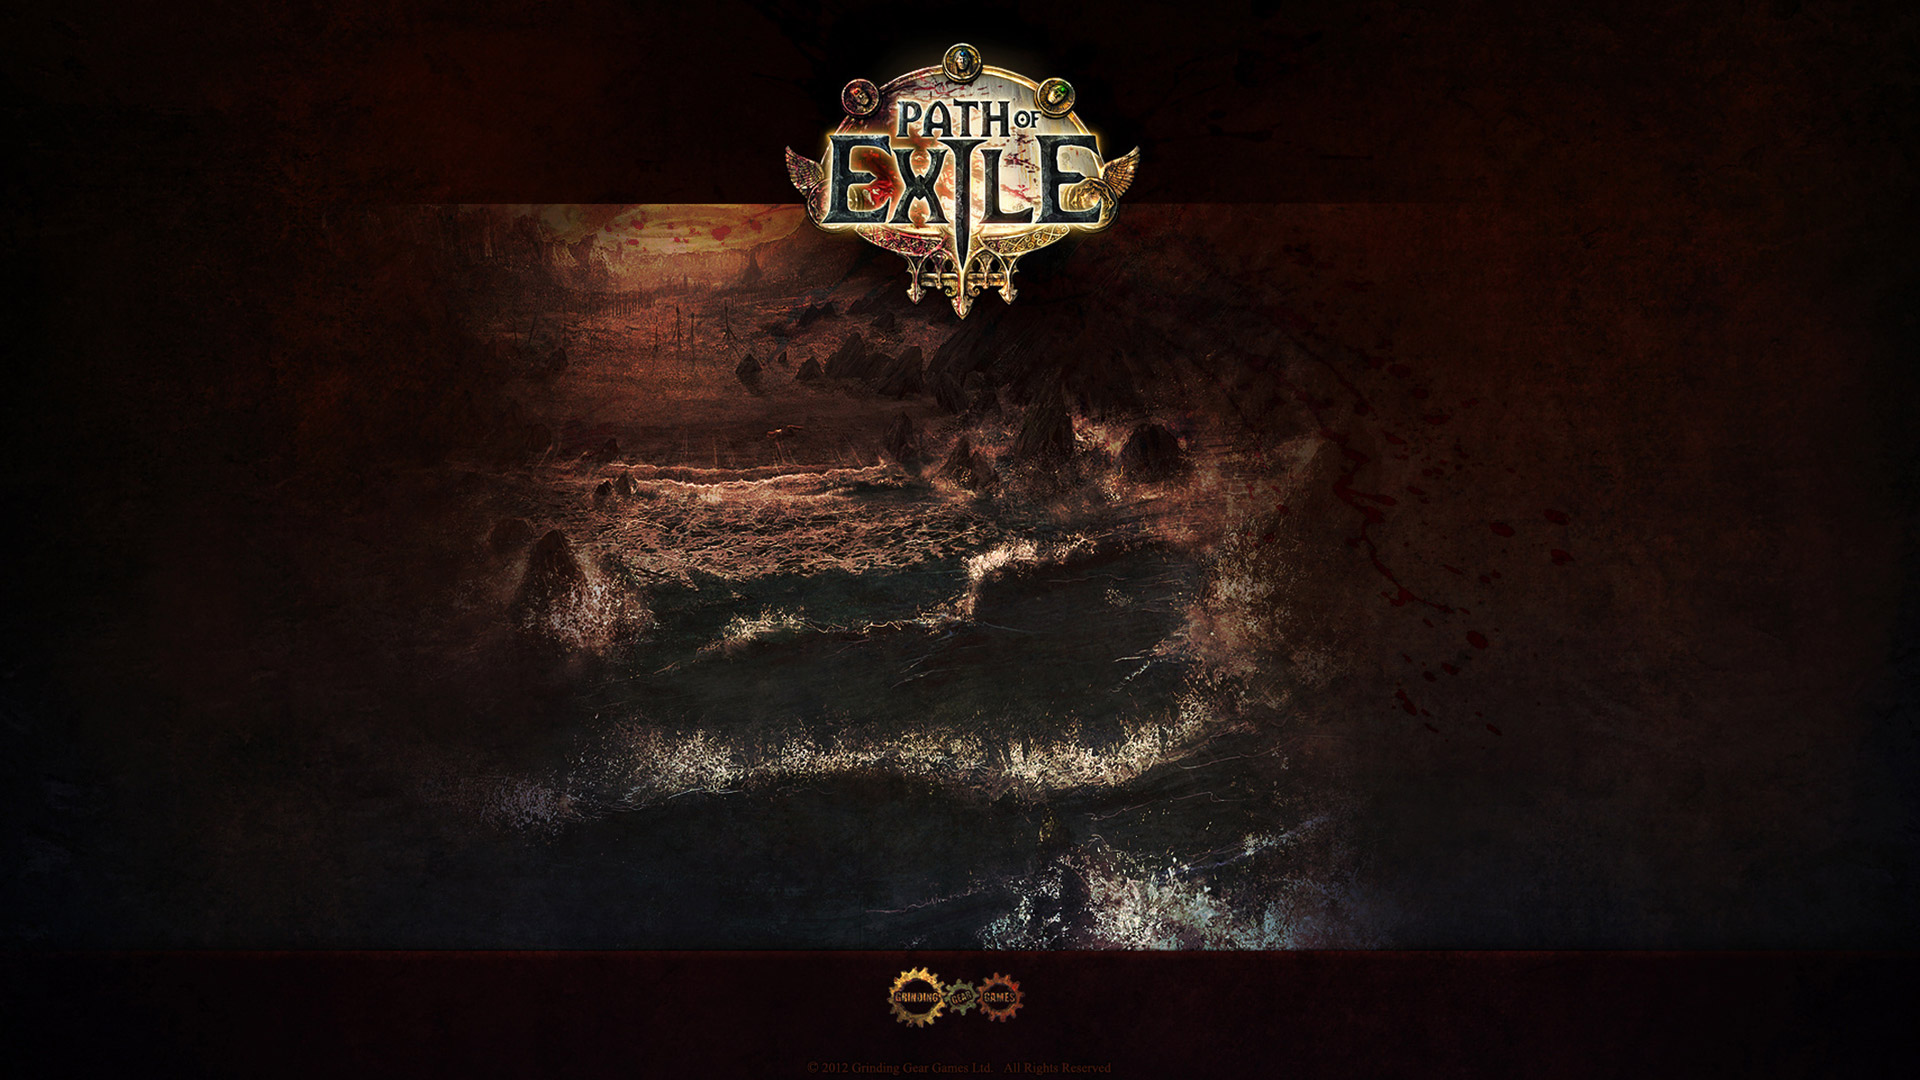 path of exile wallpaper 1920x1080,darkness,sky,photography,night,fashion accessory